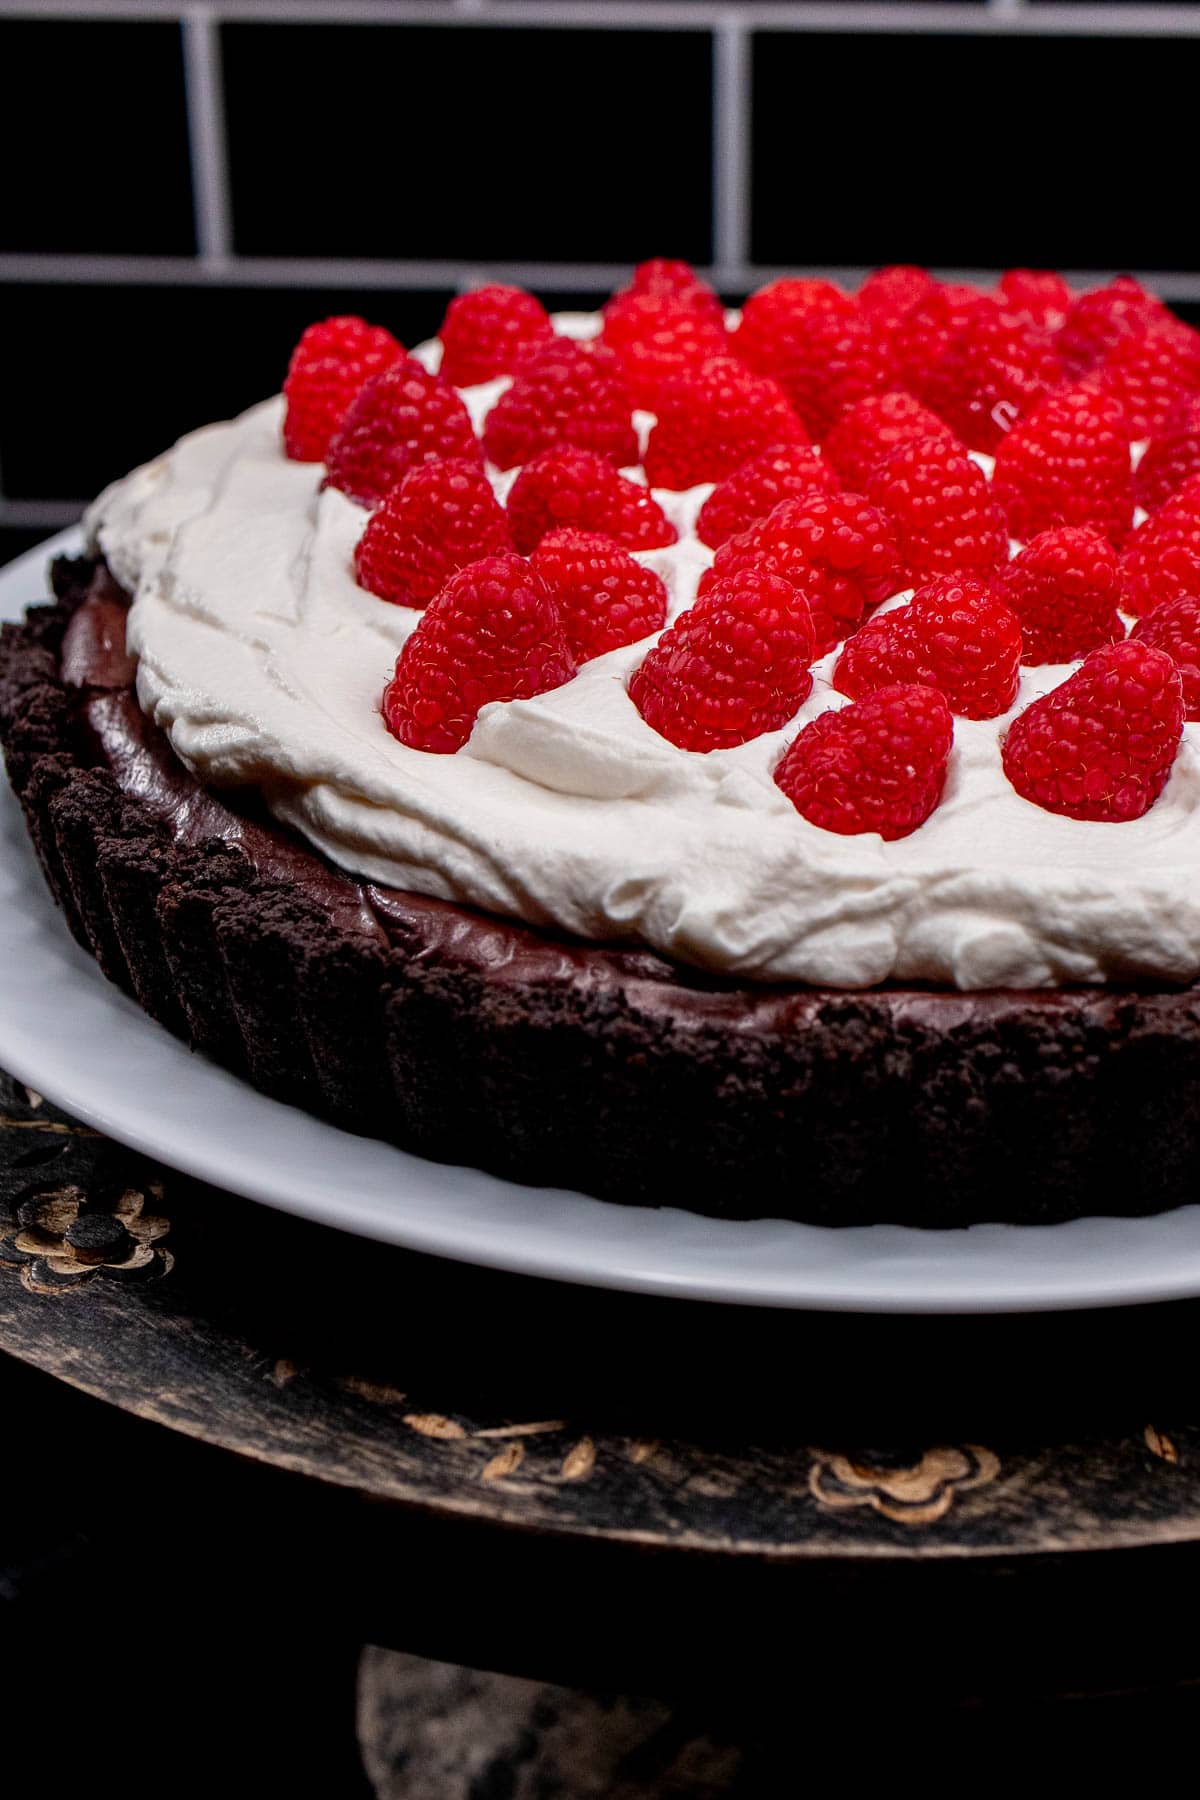 A chocolate raspberry tart topped with whipped cream and fresh raspberries on a white plate.